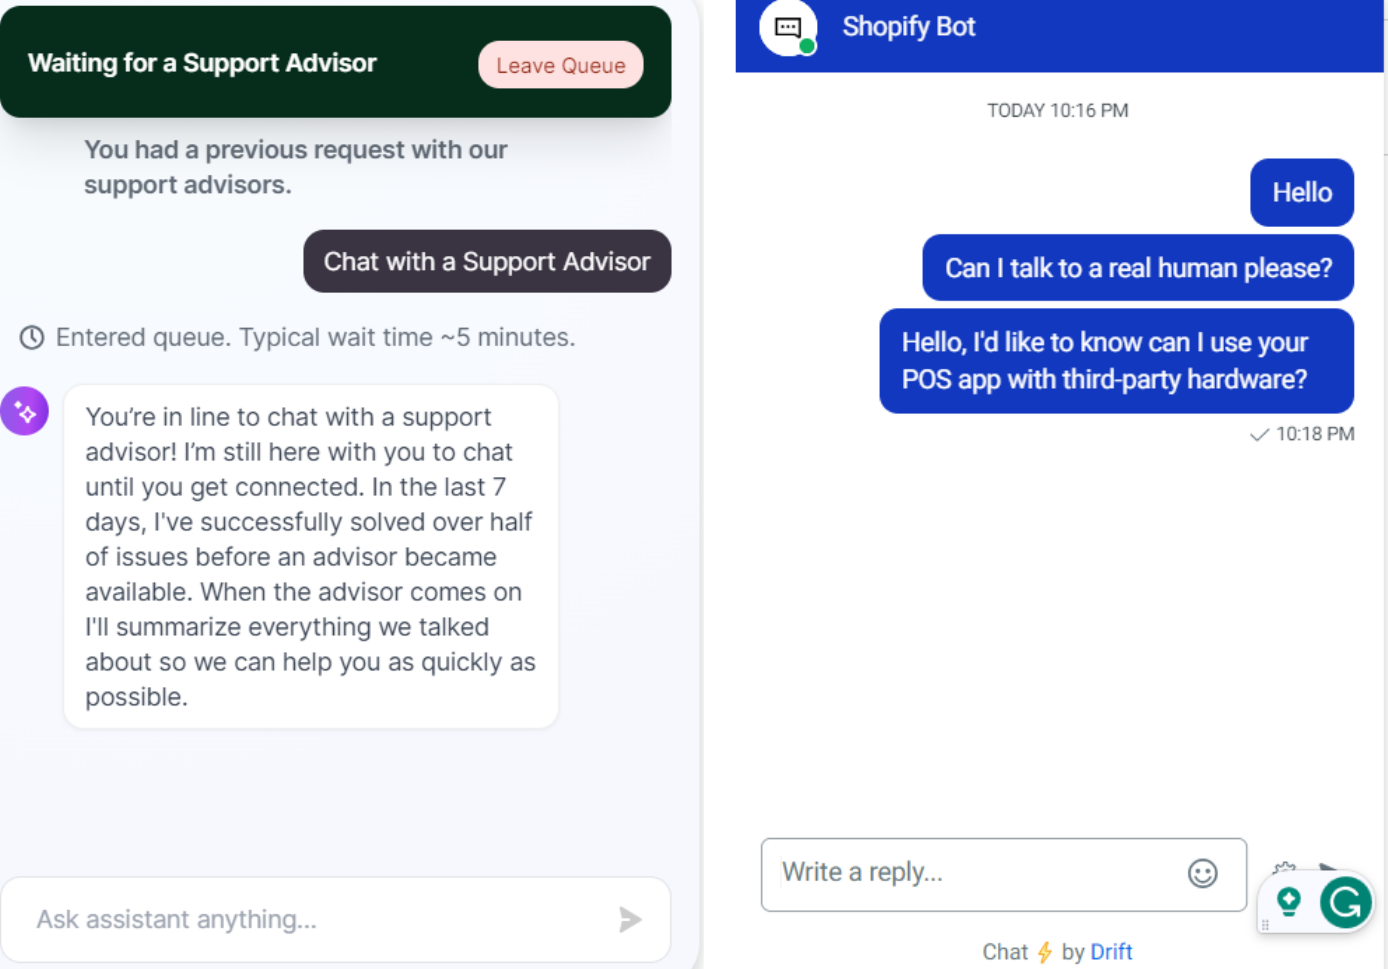 Shopify customer support interactions